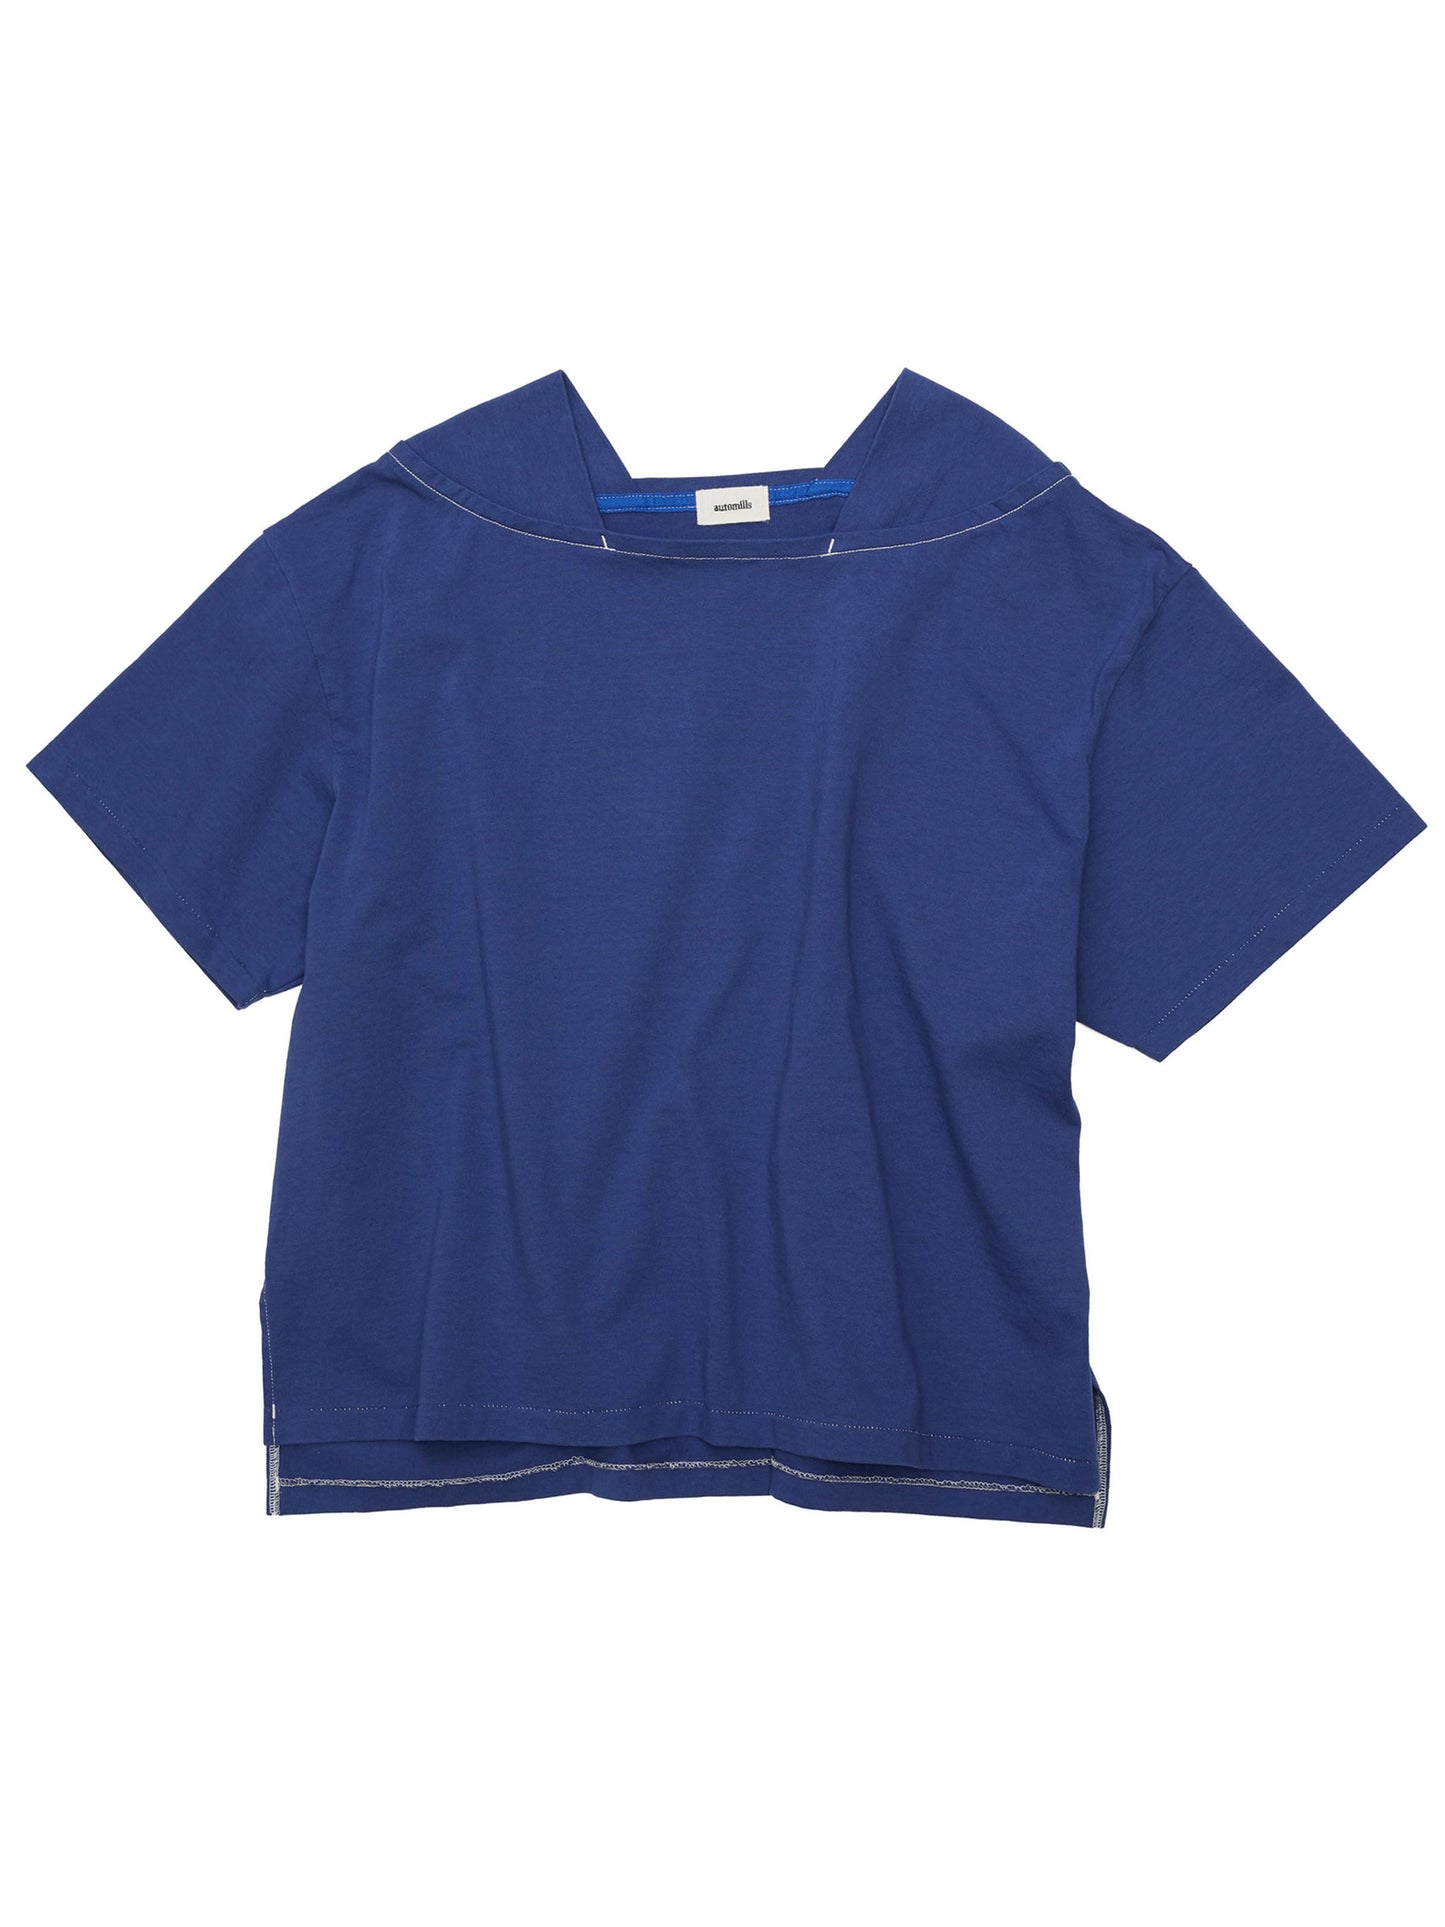 BAGGY BOAT S/S TEE COTTON JERSEY AM-C0206 Blue